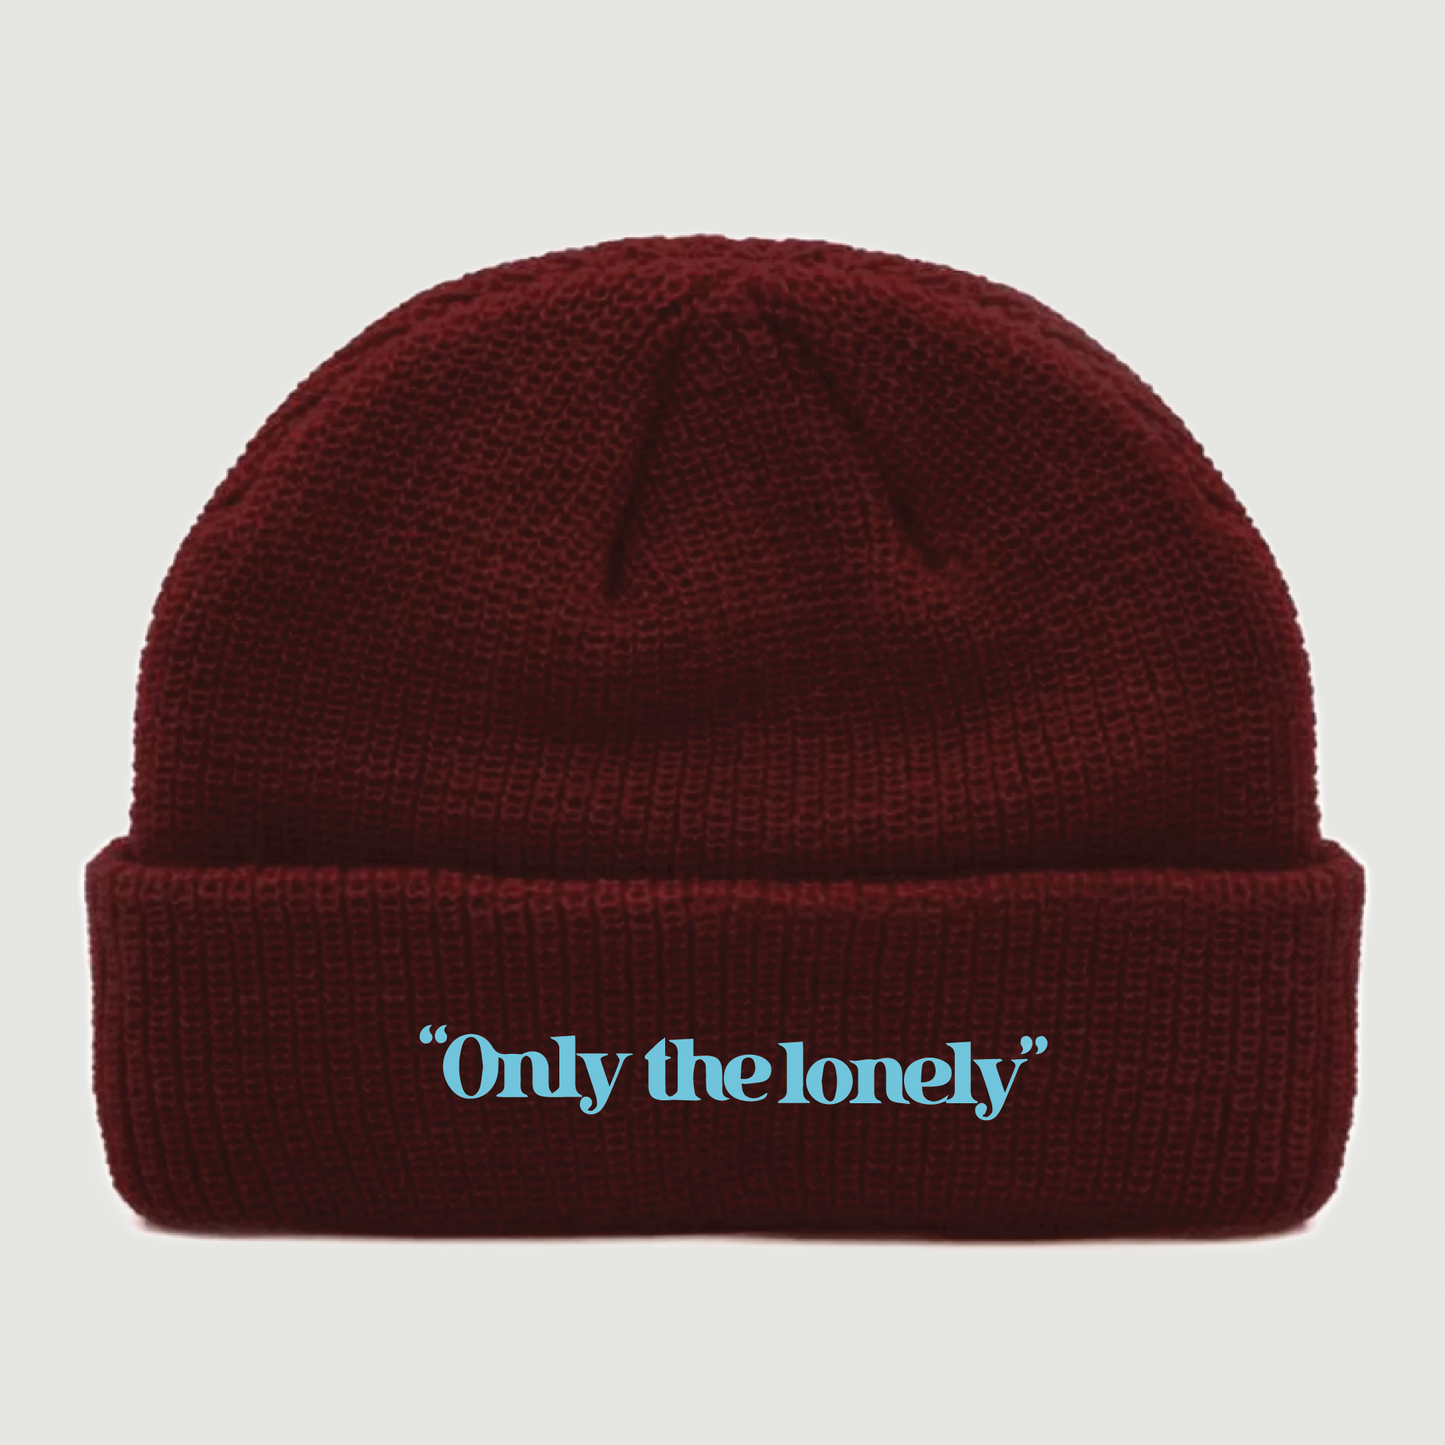 ONLY THE LONELY FISHERMAN BEANIE (BURGUNDY/BLUE)